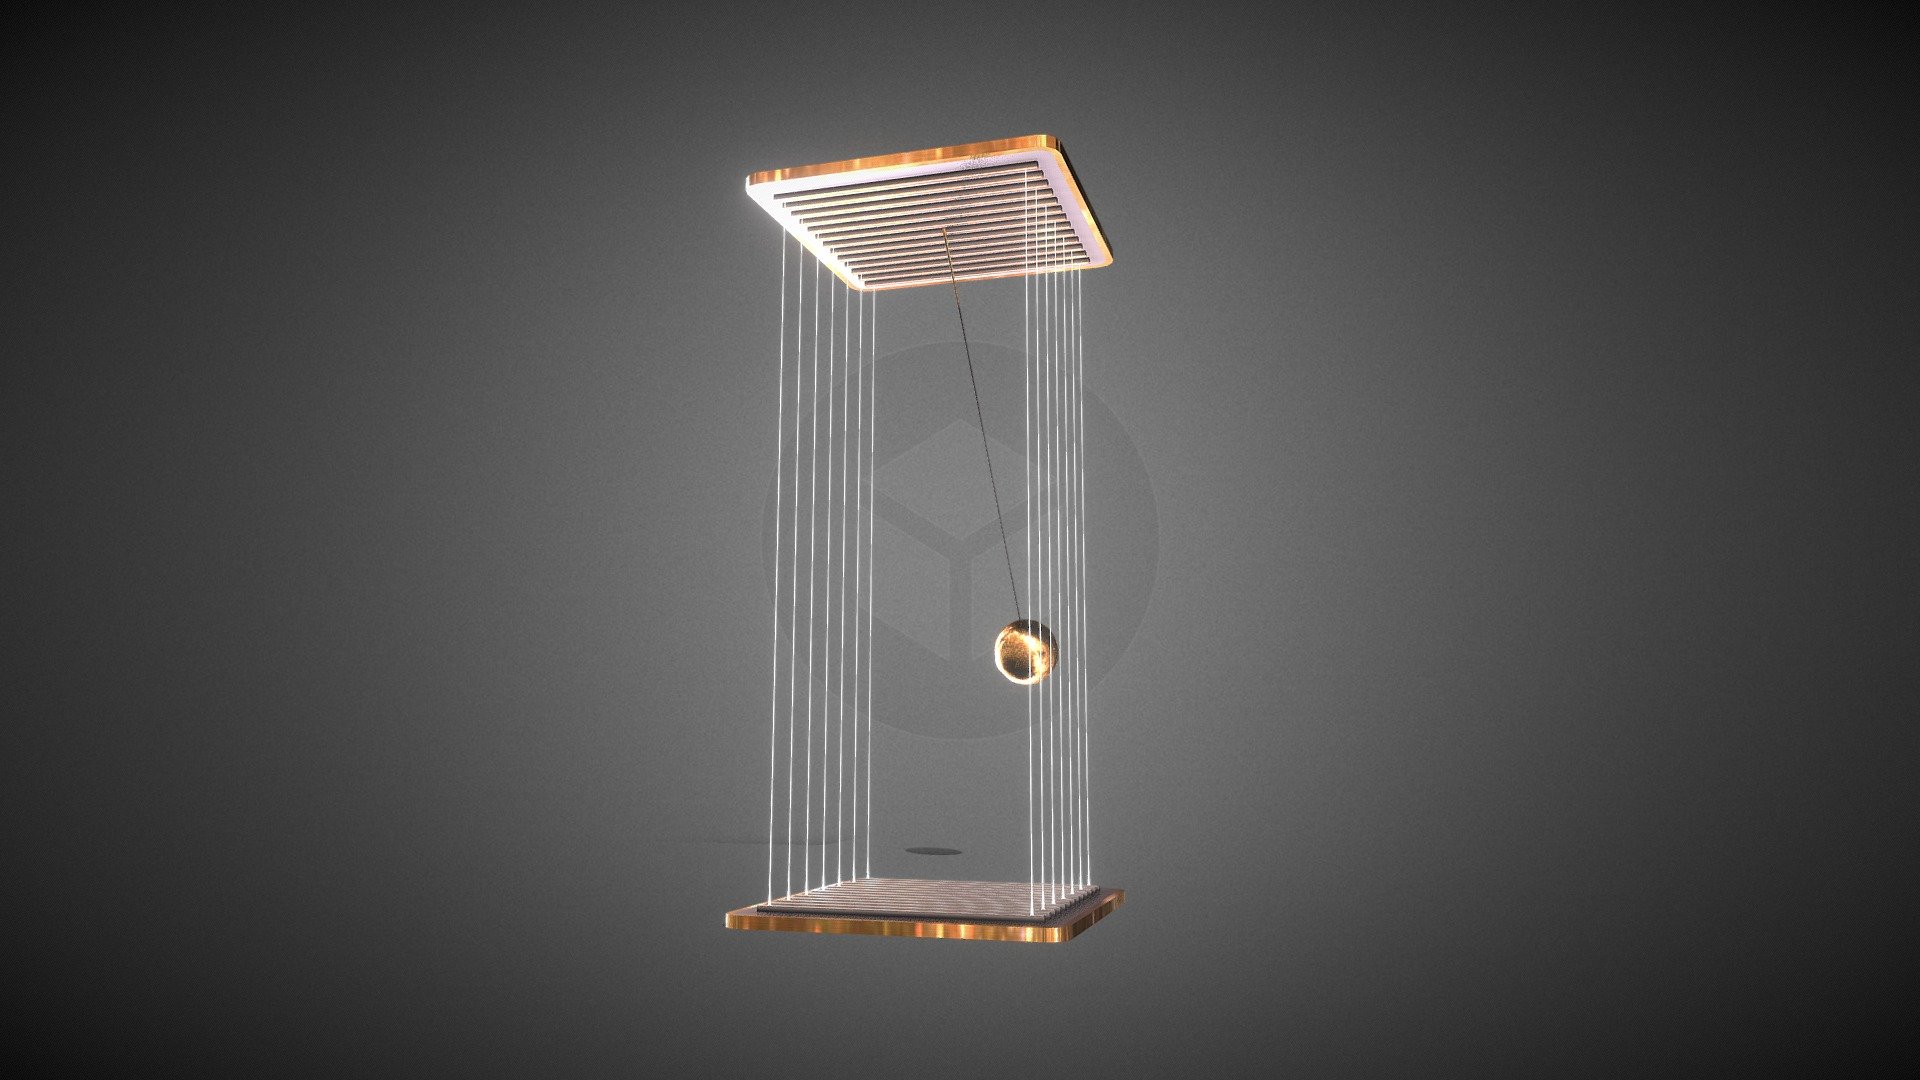 Animated 3D model of a copper pendulum swinging through light waves, inspired by the fascinating light experiments of Brazilian artist Flavio Carvalho. 

3D Model and animation by FGR3D of Low Poly Models 3d model